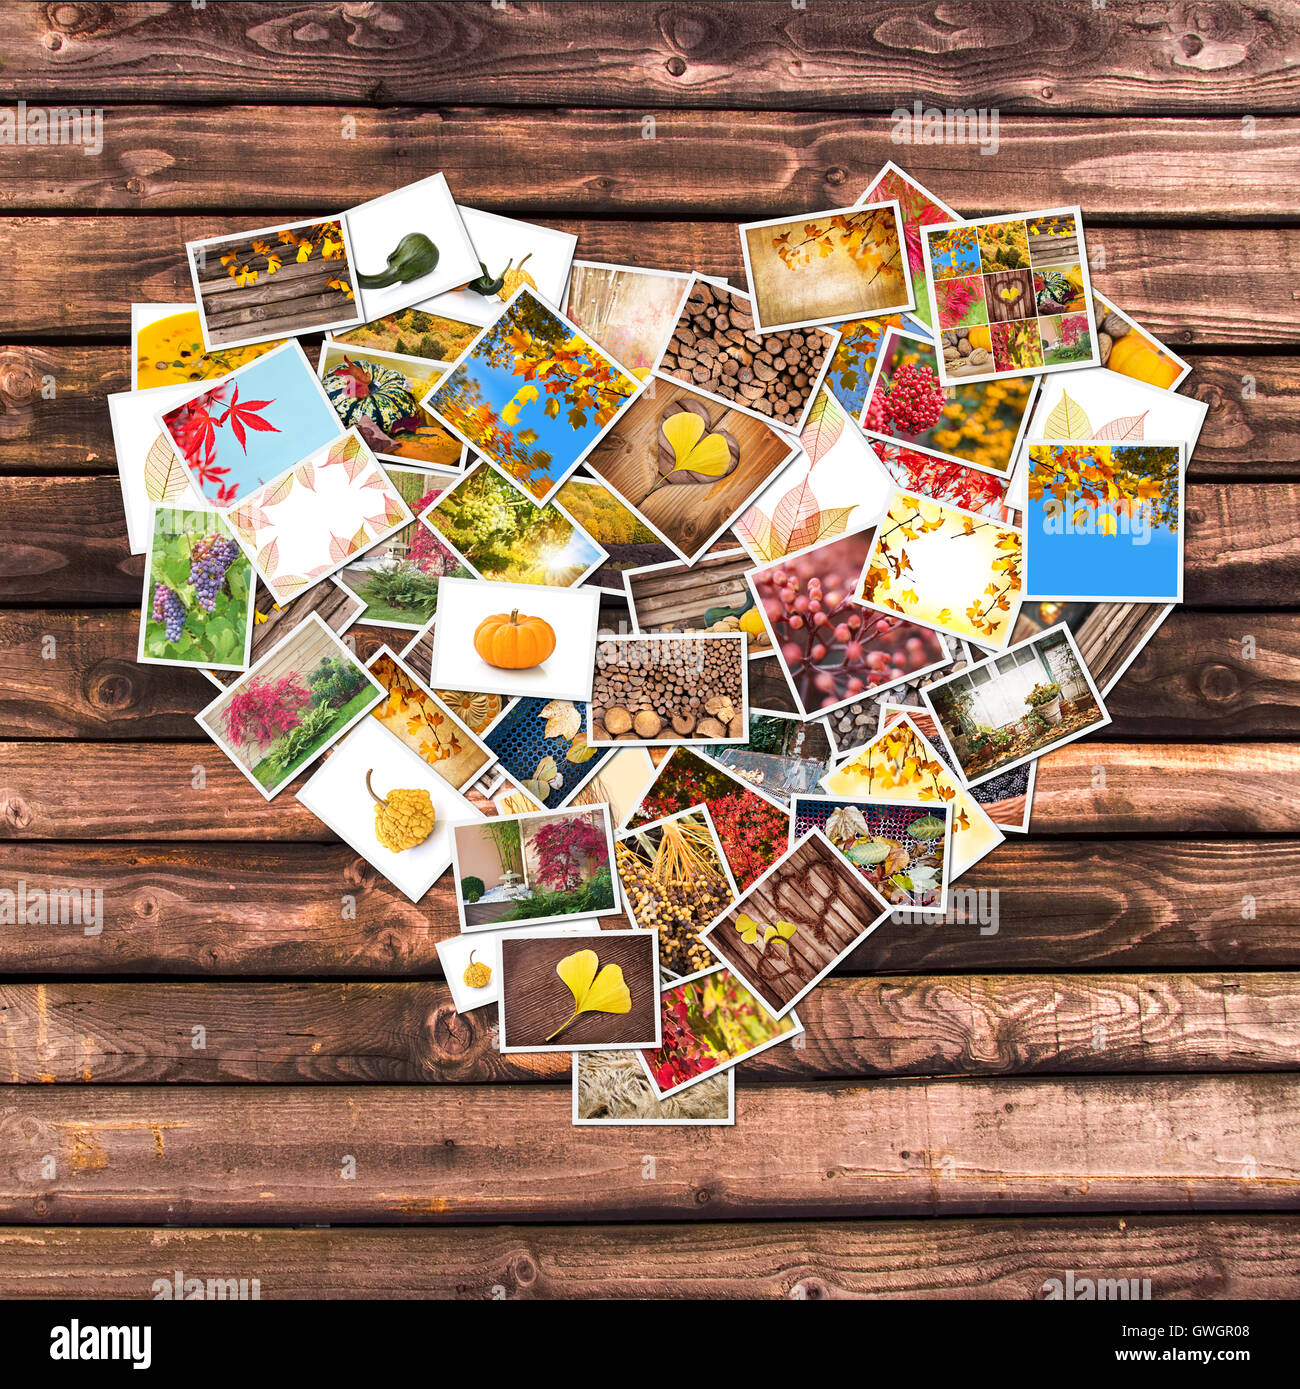 Autumnal photos heart collage, wooden planks background Stock Photo